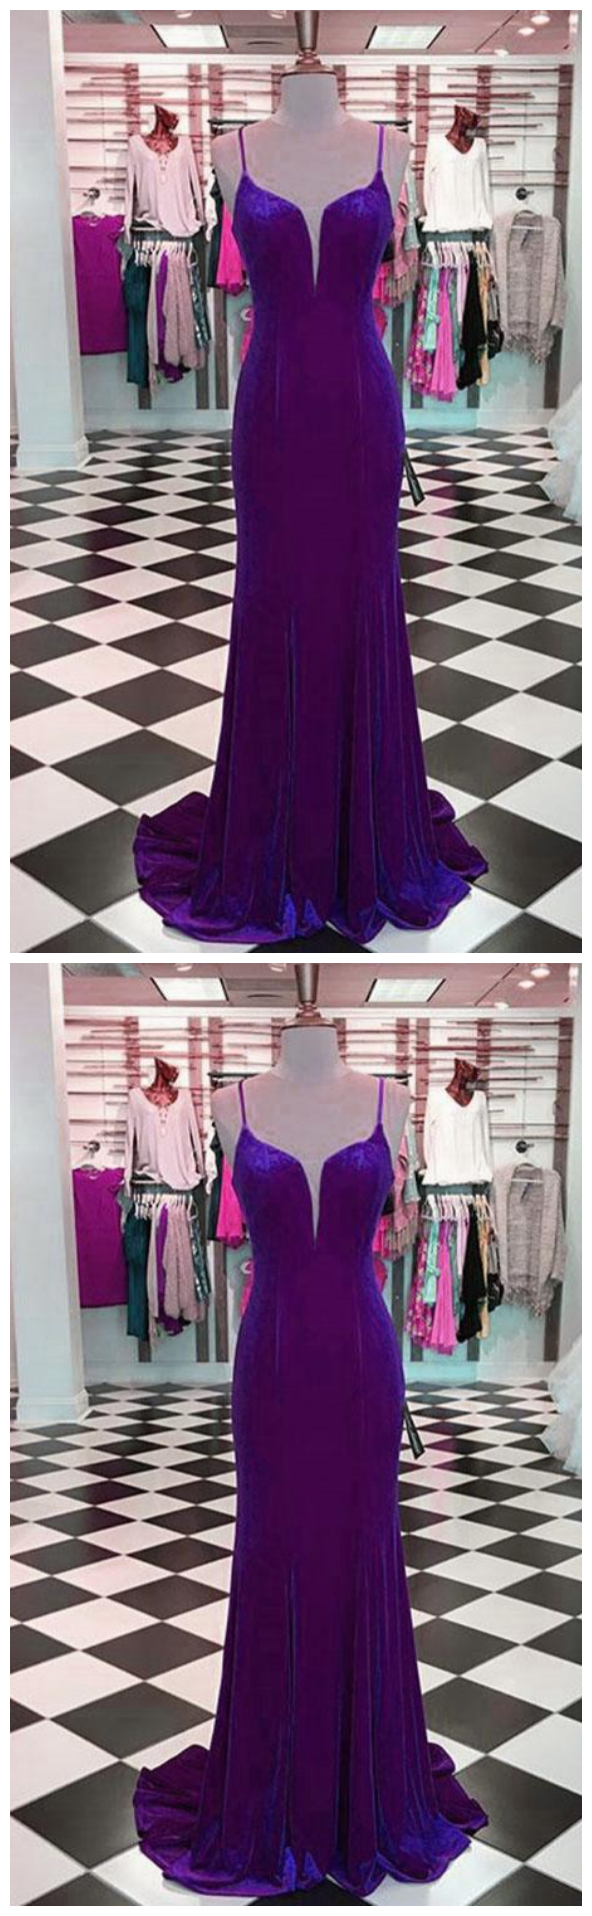 Sexy Purple Mermaid Prom Dresses With Spaghetti Straps Long Velvet Evening Party Gowns